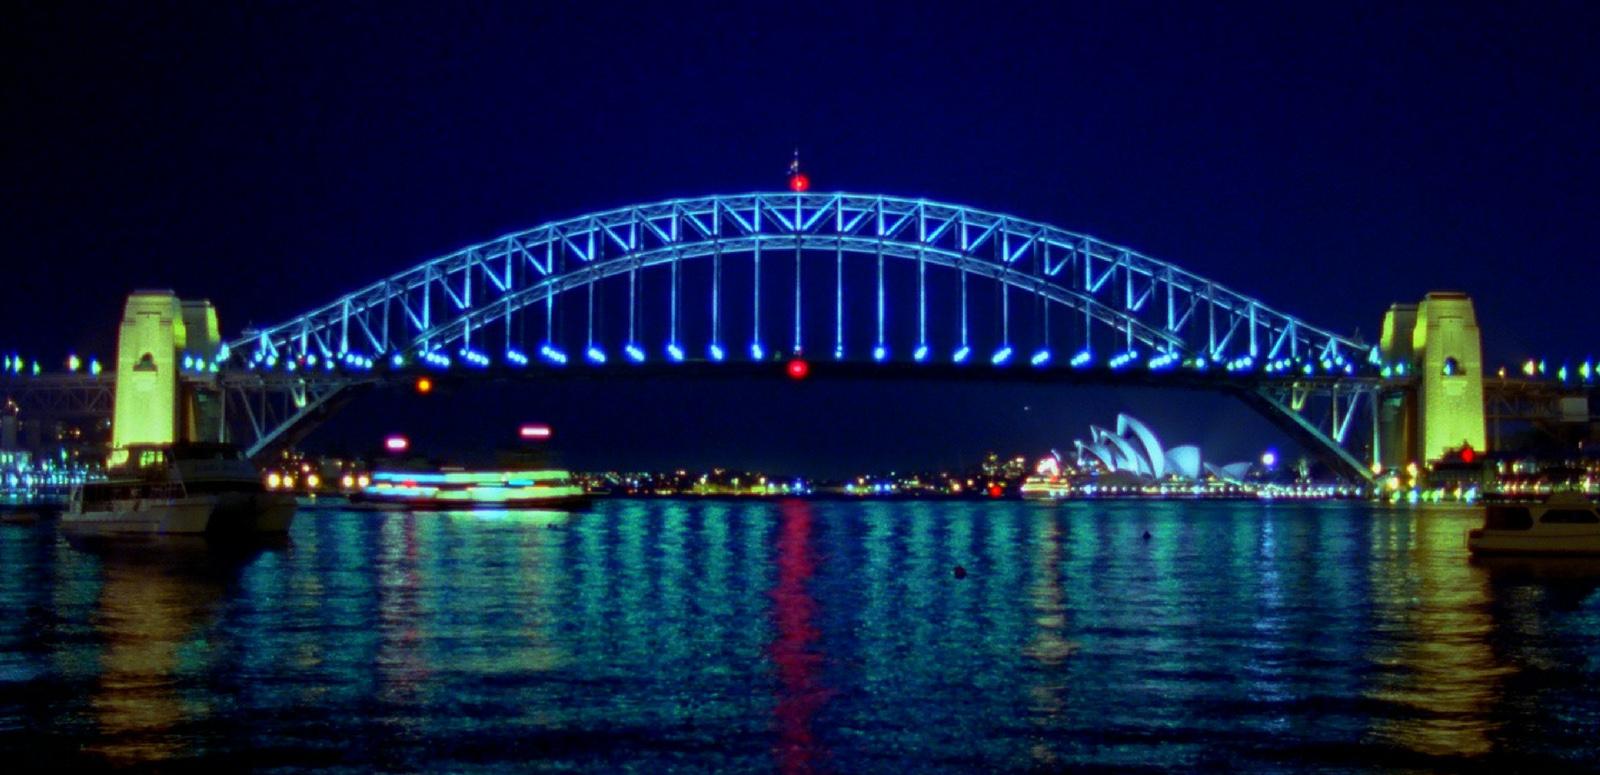 A nightime photo of the Sydney Harbour Bridge showing it all lit up. The bridge arch is blue with red lights at the top and bottom centre. The pylons are lit yellow. The water shows the reflections of the passing ferry and the Sydney Opera House.